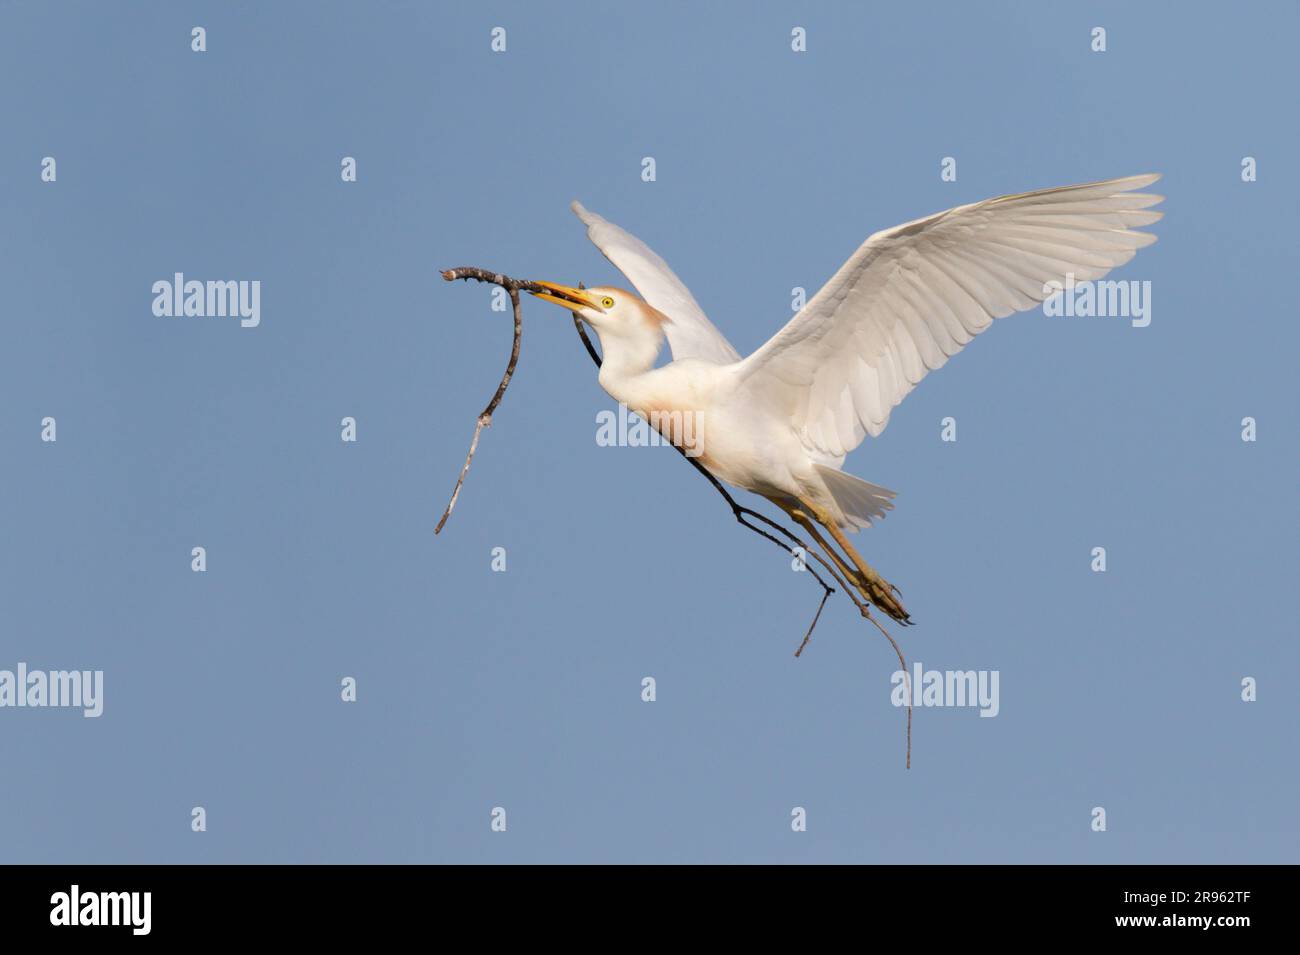 Cattle egret (Bubulcus ibis) flying with stick for nest in blue sky, Houston area, Texas, USA. Stock Photo